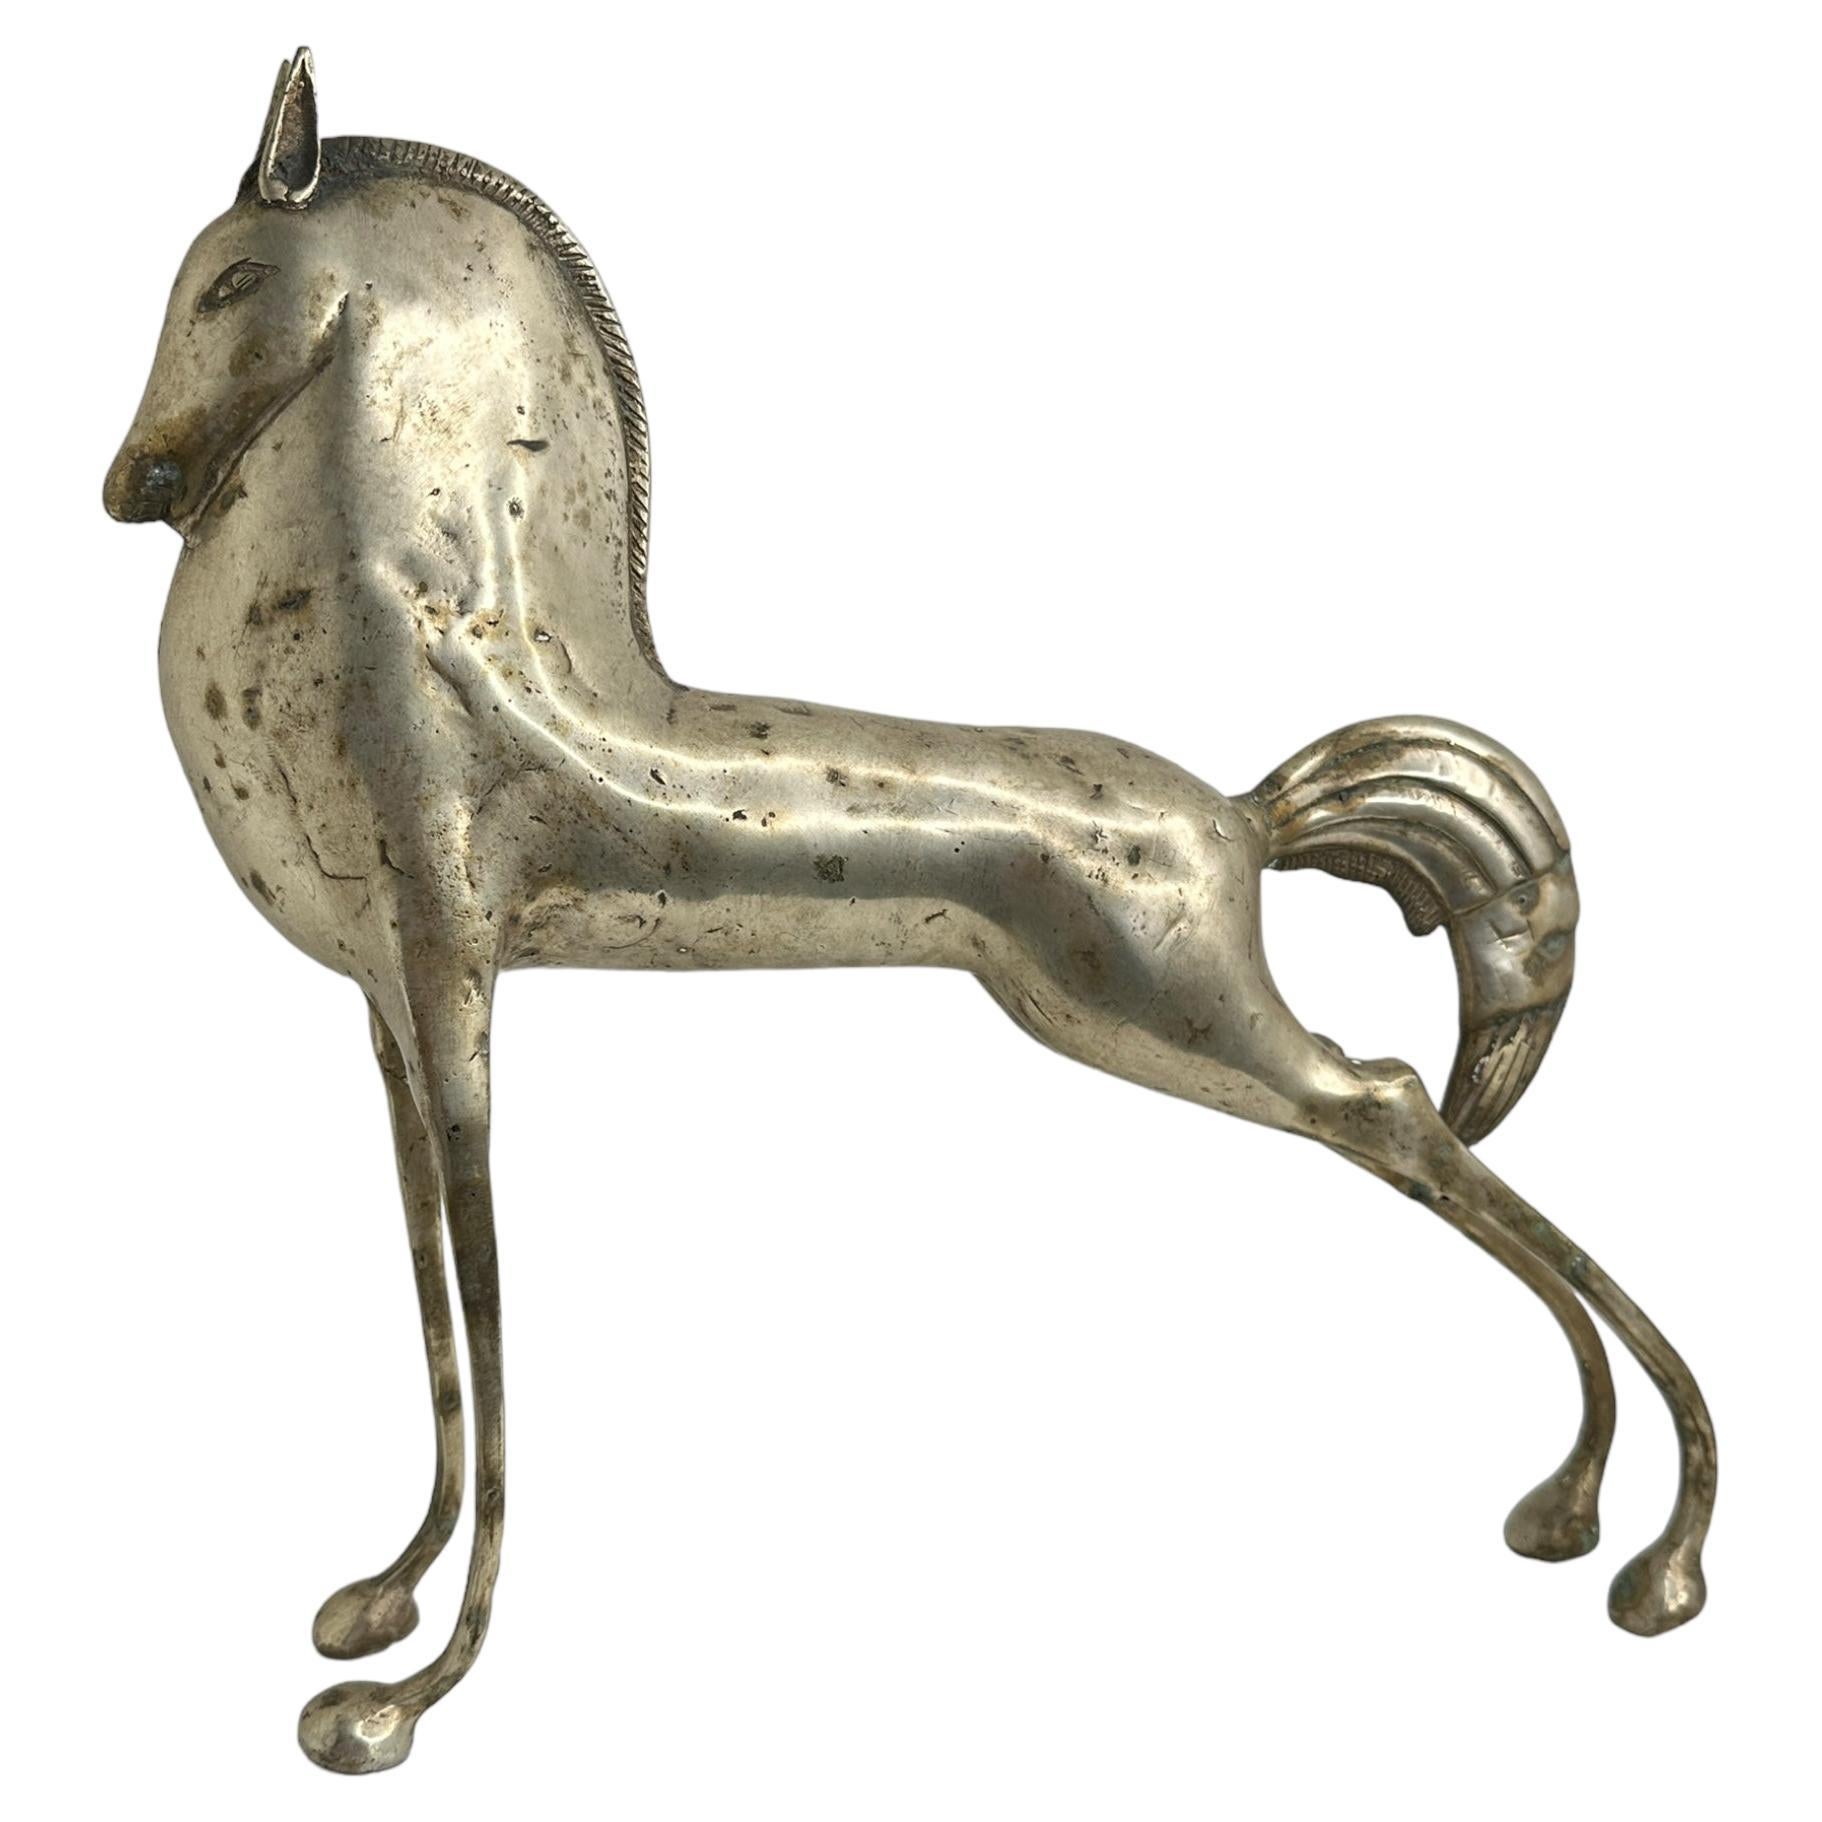 Gigantic Nickel Etruscan Horse Sculpture Weinberg Style 1970s, Italy